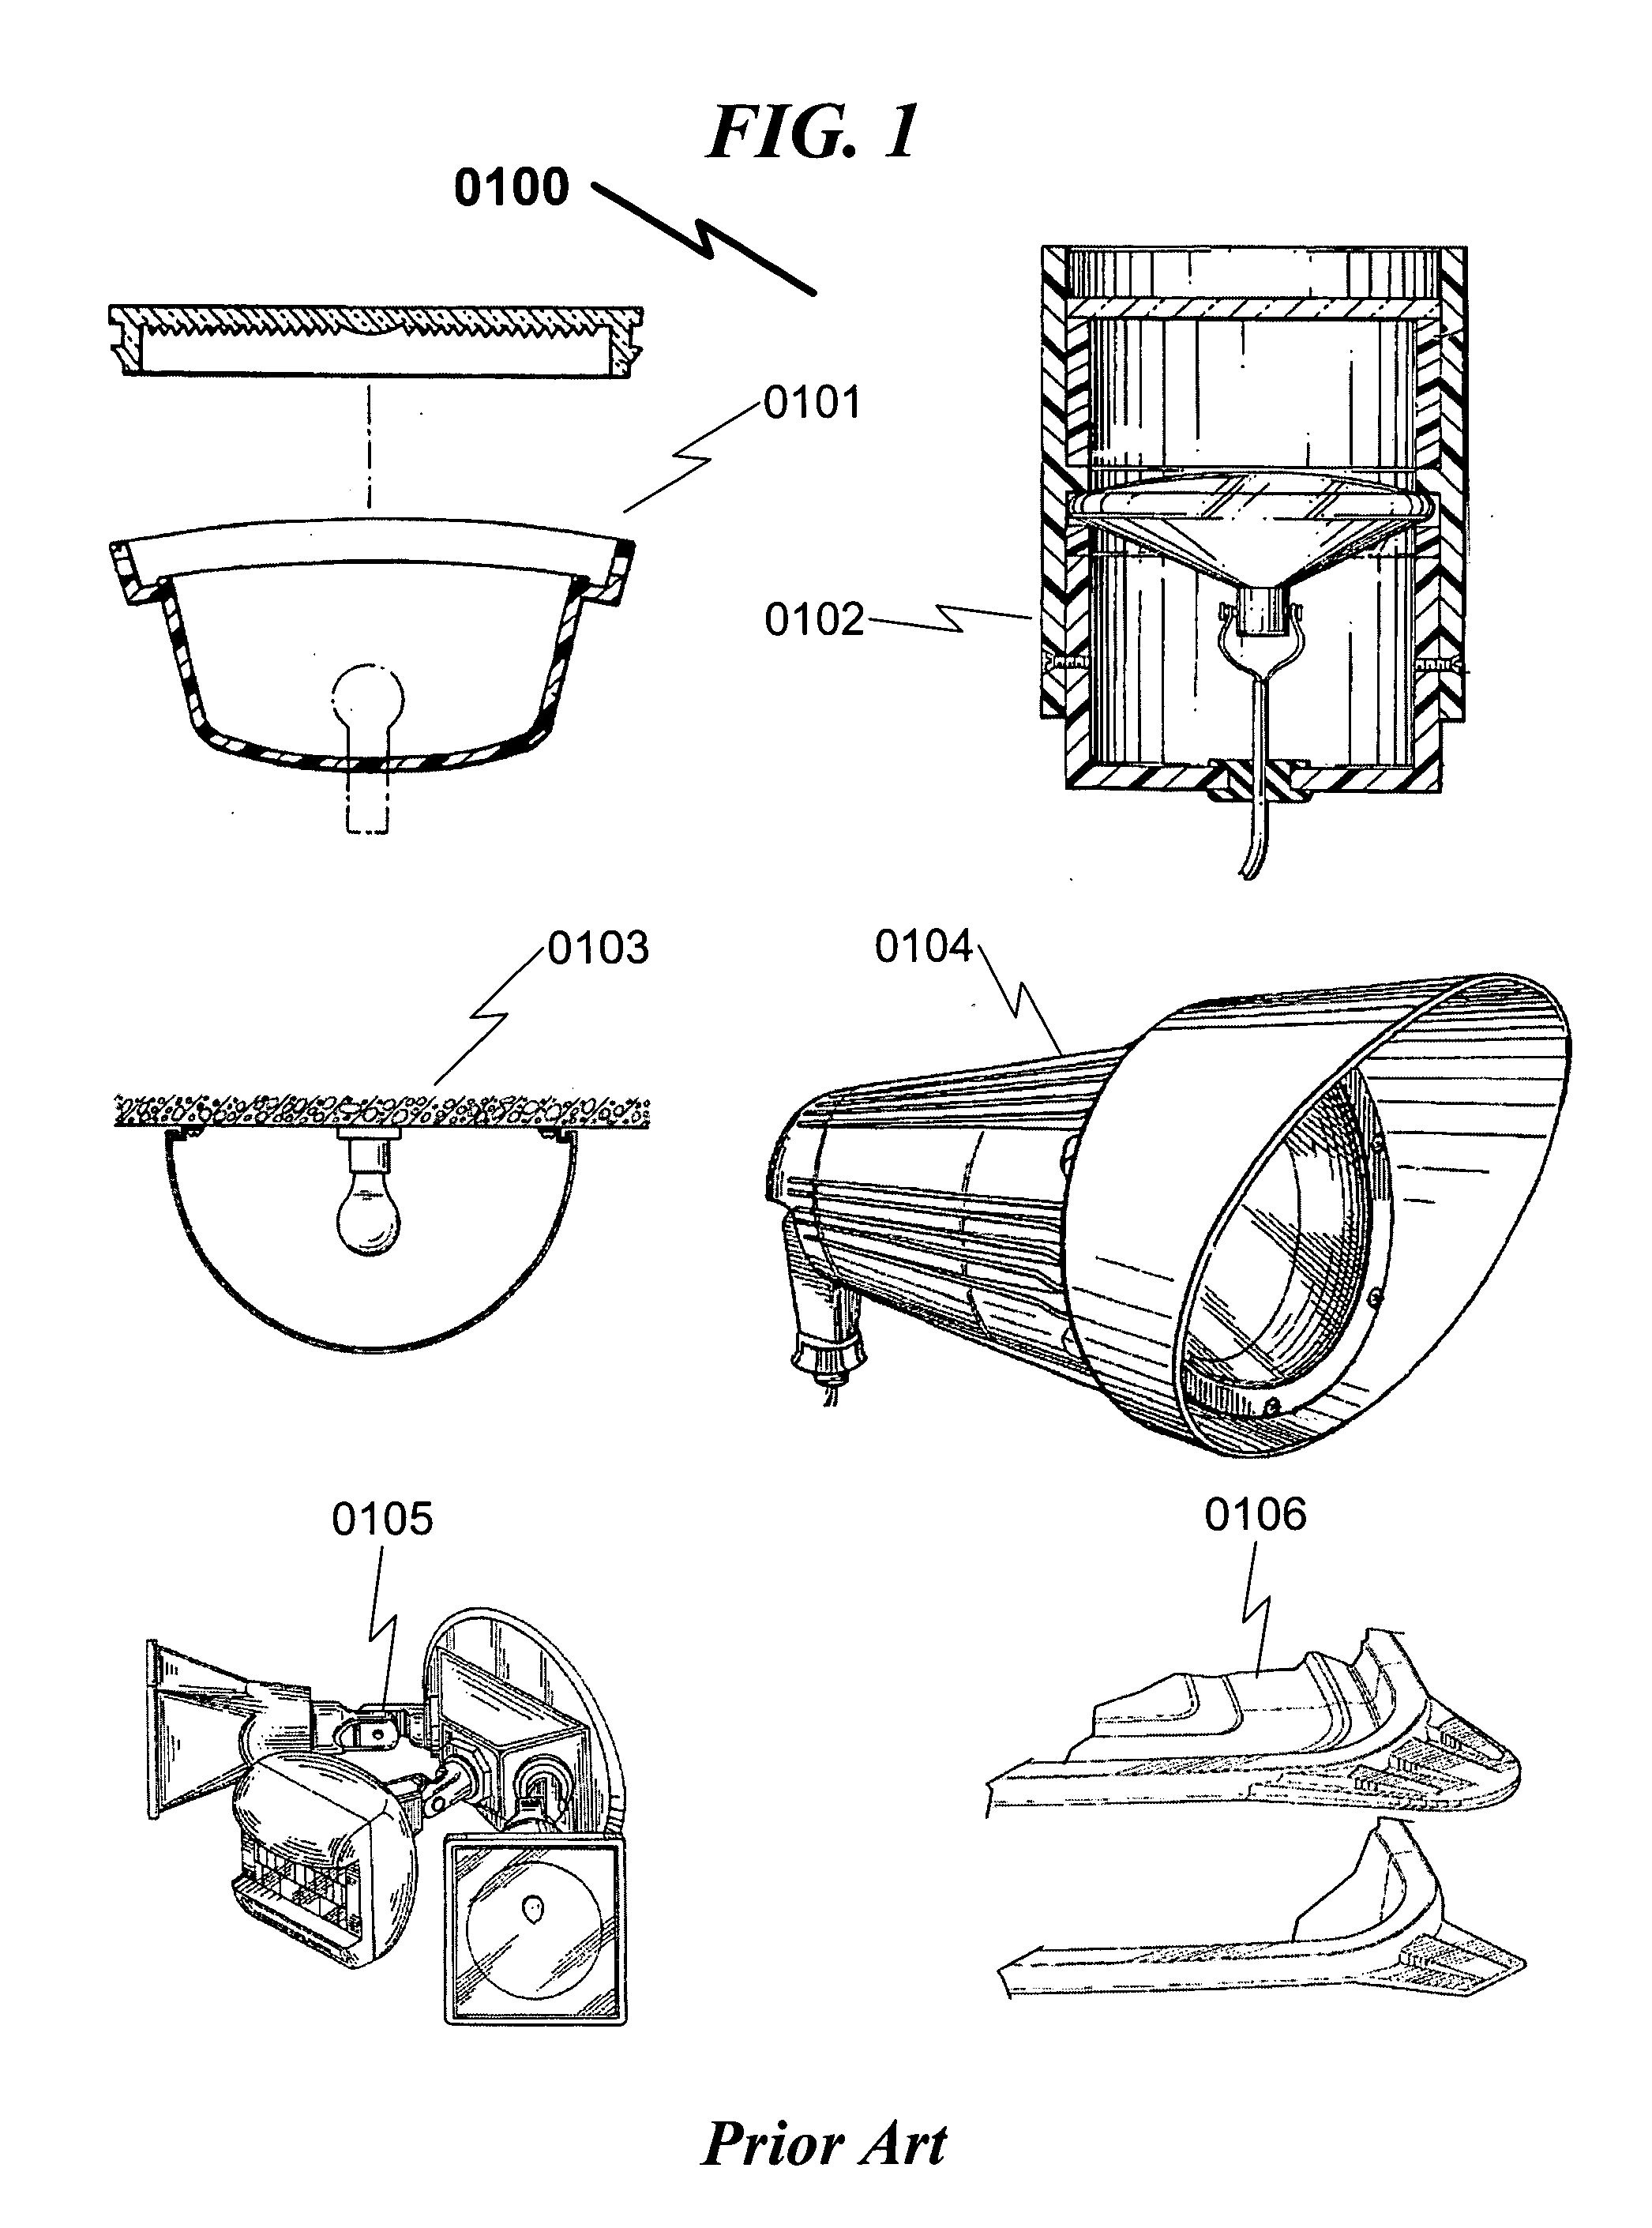 Light fixture cover system and method